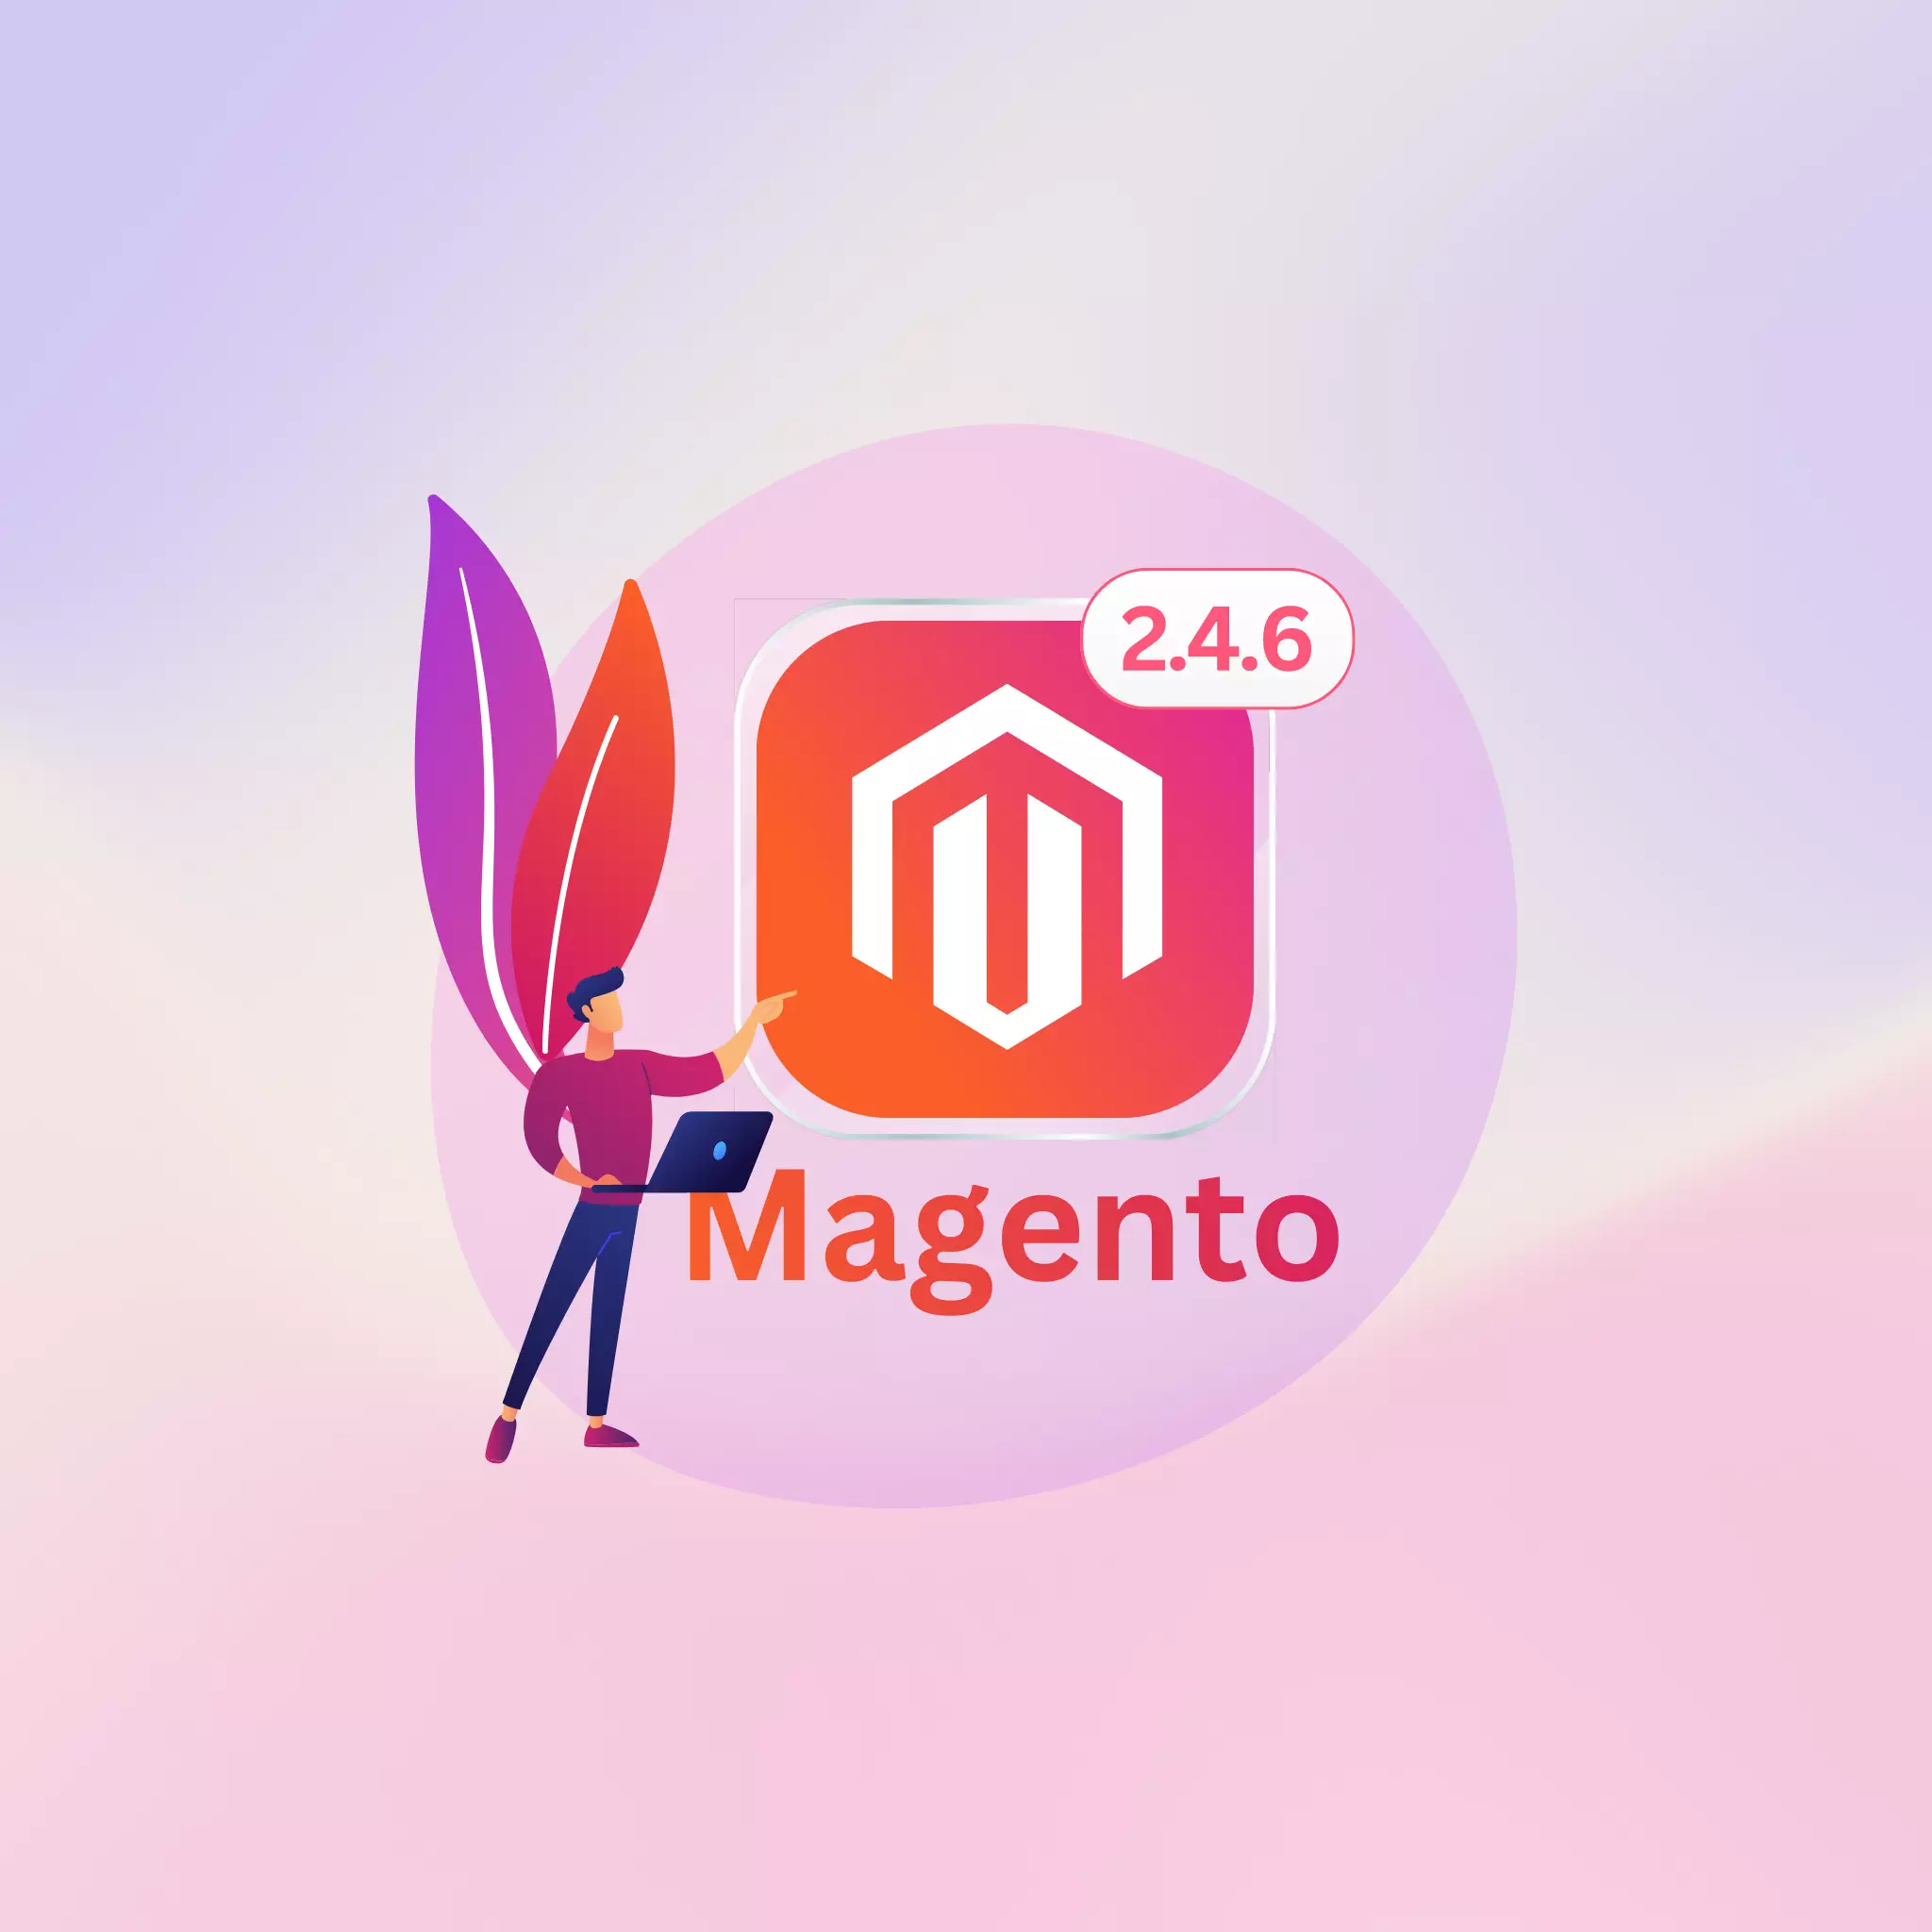 Discover the Latest Features and Enhancements in Magento 2.4.6 Release